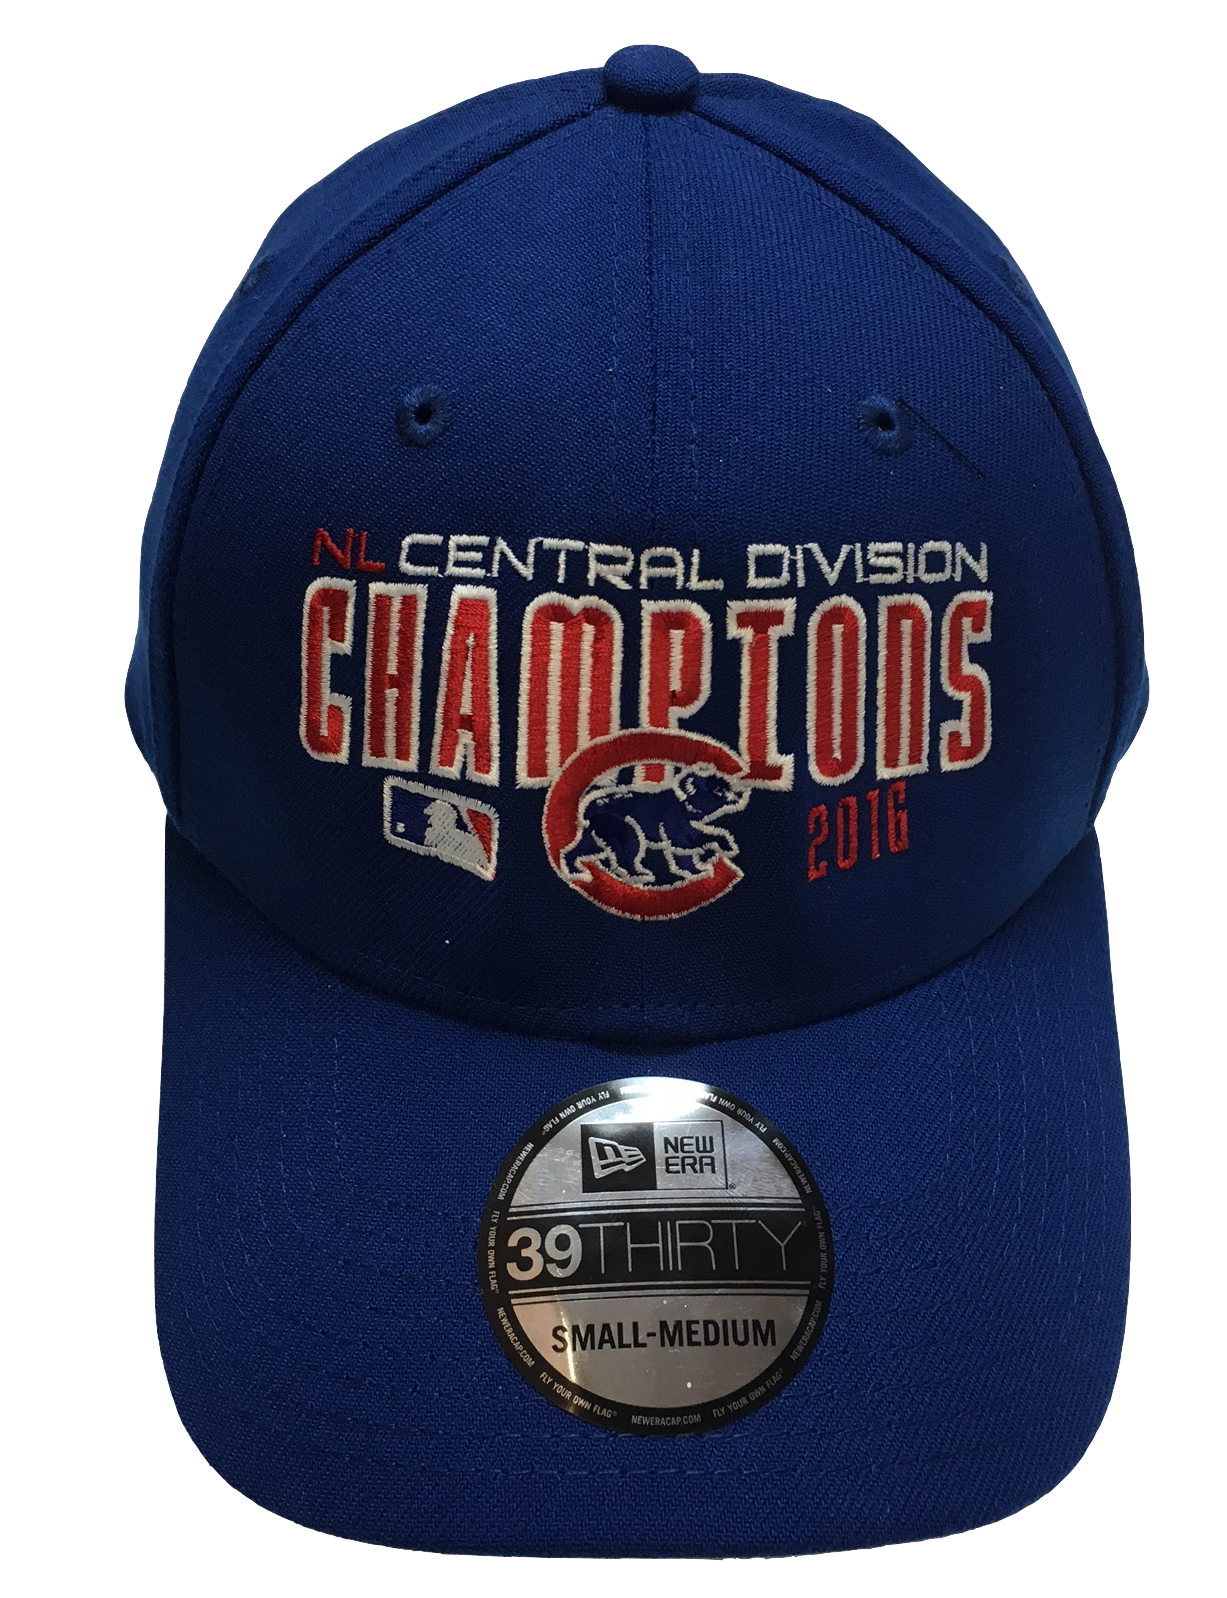 Men's Chicago Cubs 2016 NL Central Division Champions New Era Royal MLB Team 39THIRTY Flex Hat - Pro Jersey Sports - 2